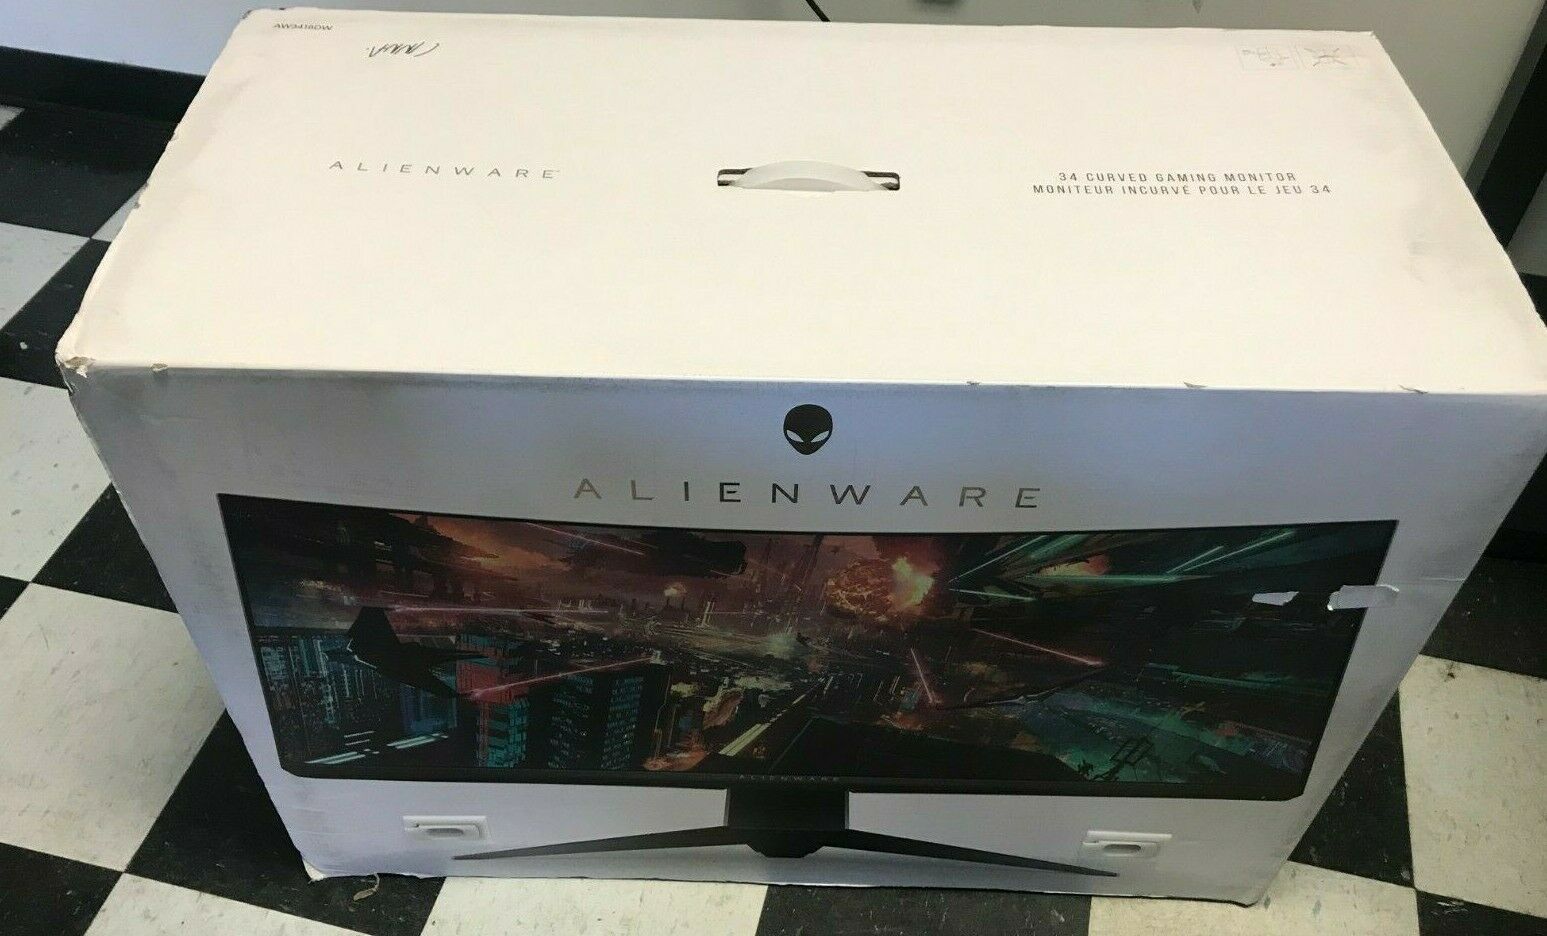 Alienware 34" AW3418DW ultrawide gaming monitor